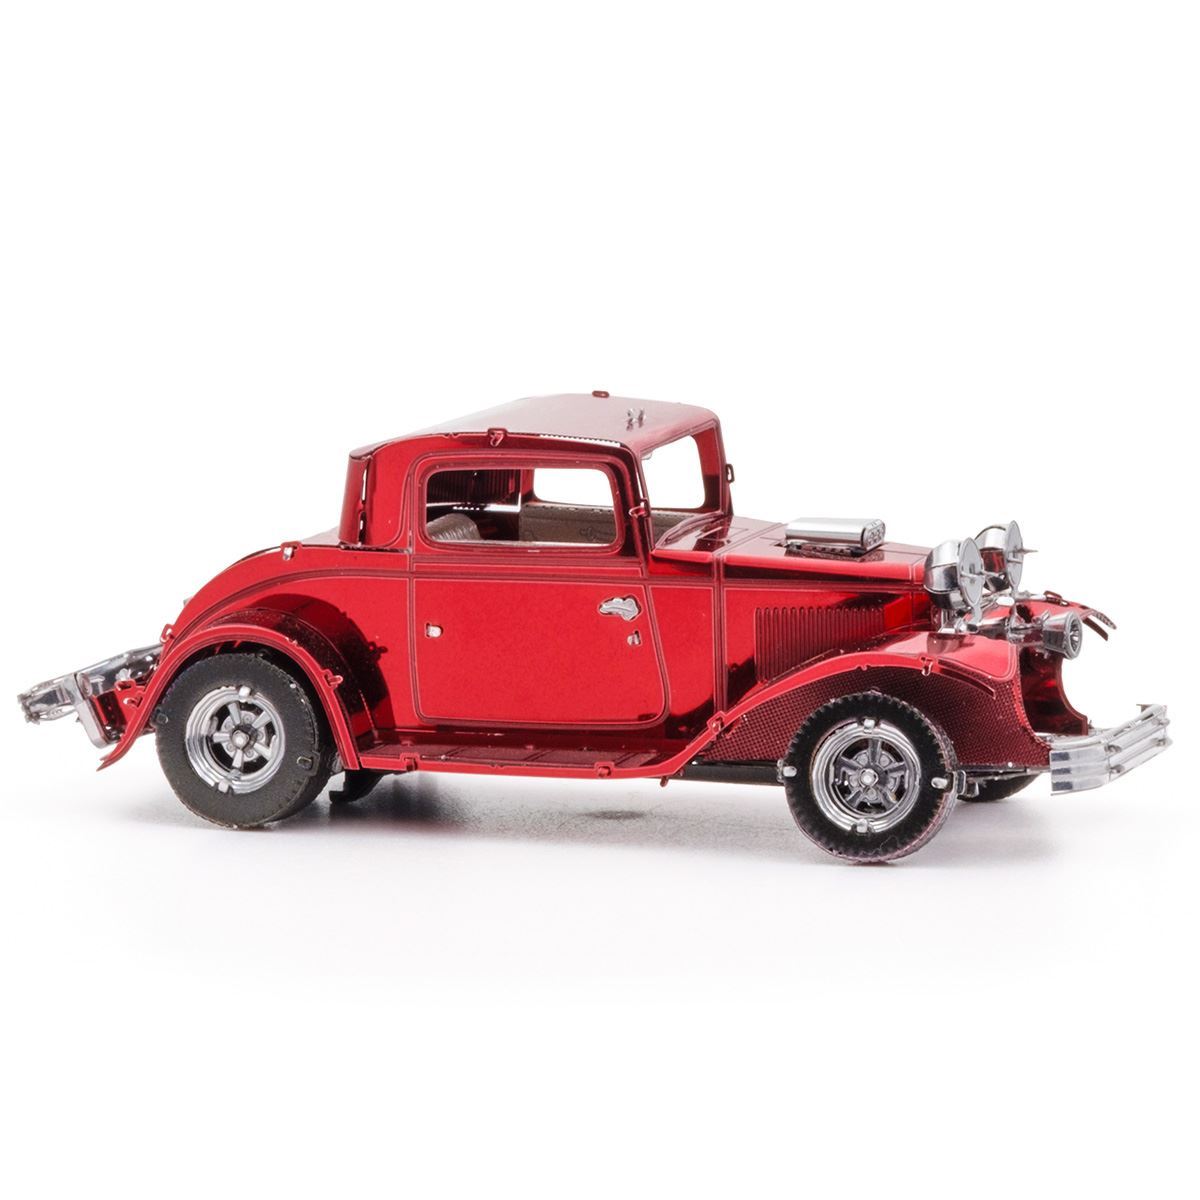 Metal Earth 1932 Ford Coupe 3d Metal Model Kits